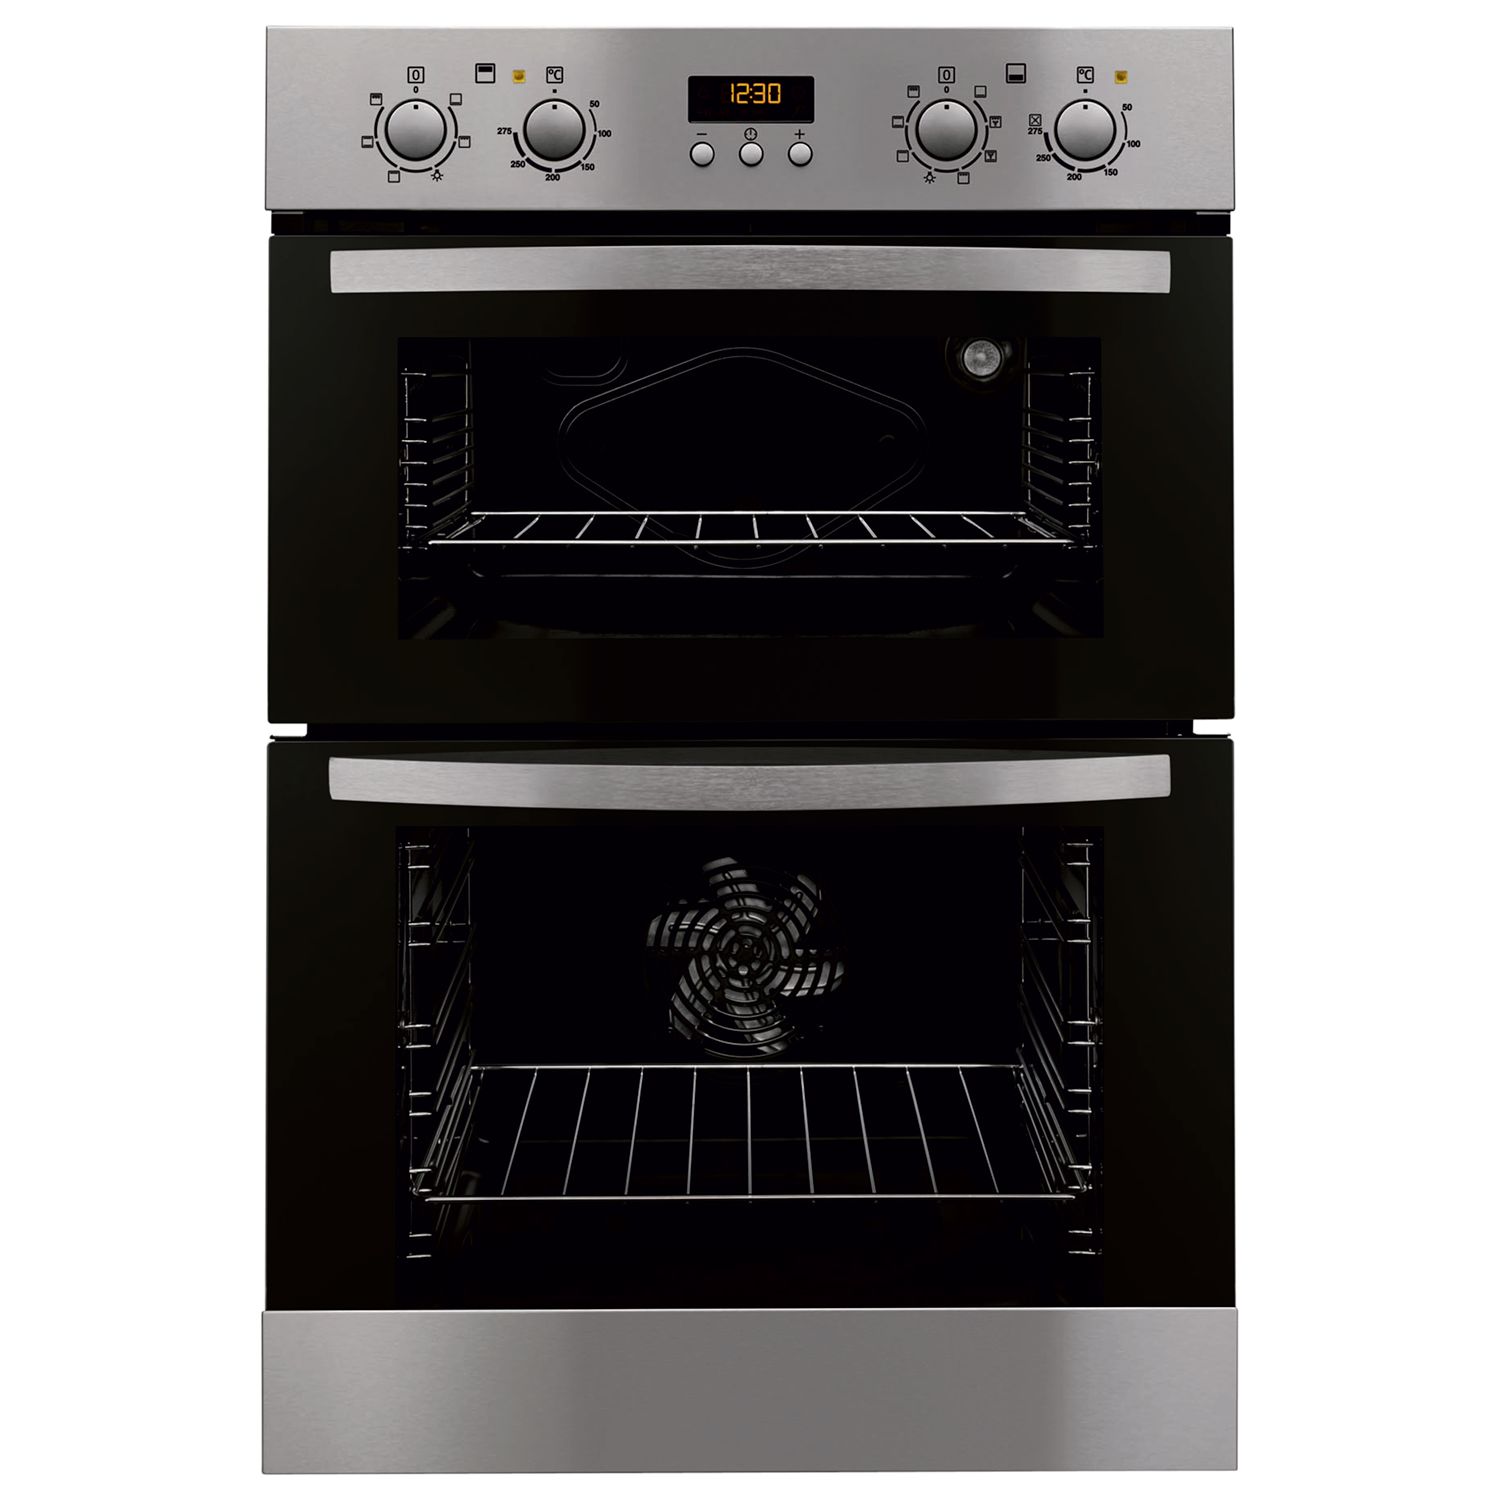 Zanussi ZOD35712XK Built-In Double Electric Oven, Stainless Steel